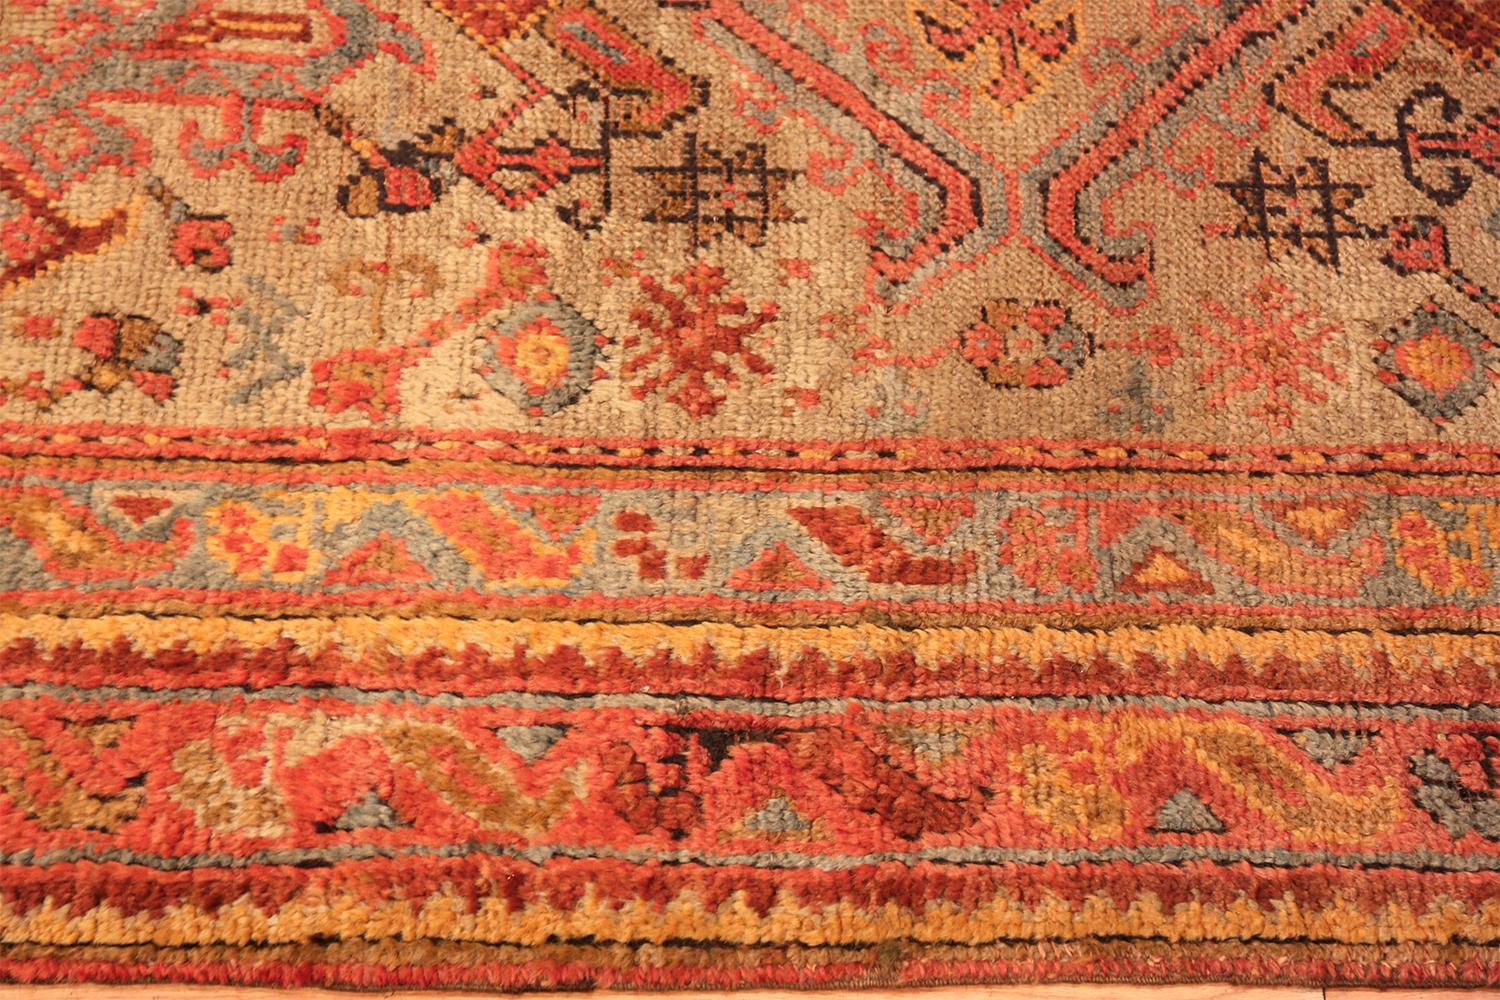 A beautifully decorative and warm antique Turkish Oushak runner rug, country of origin / rug type: antique Turkish rug, date: circa 1900. Size: 4 ft 5 in x 21 ft 3 in (1.35 m x 6.48 m).